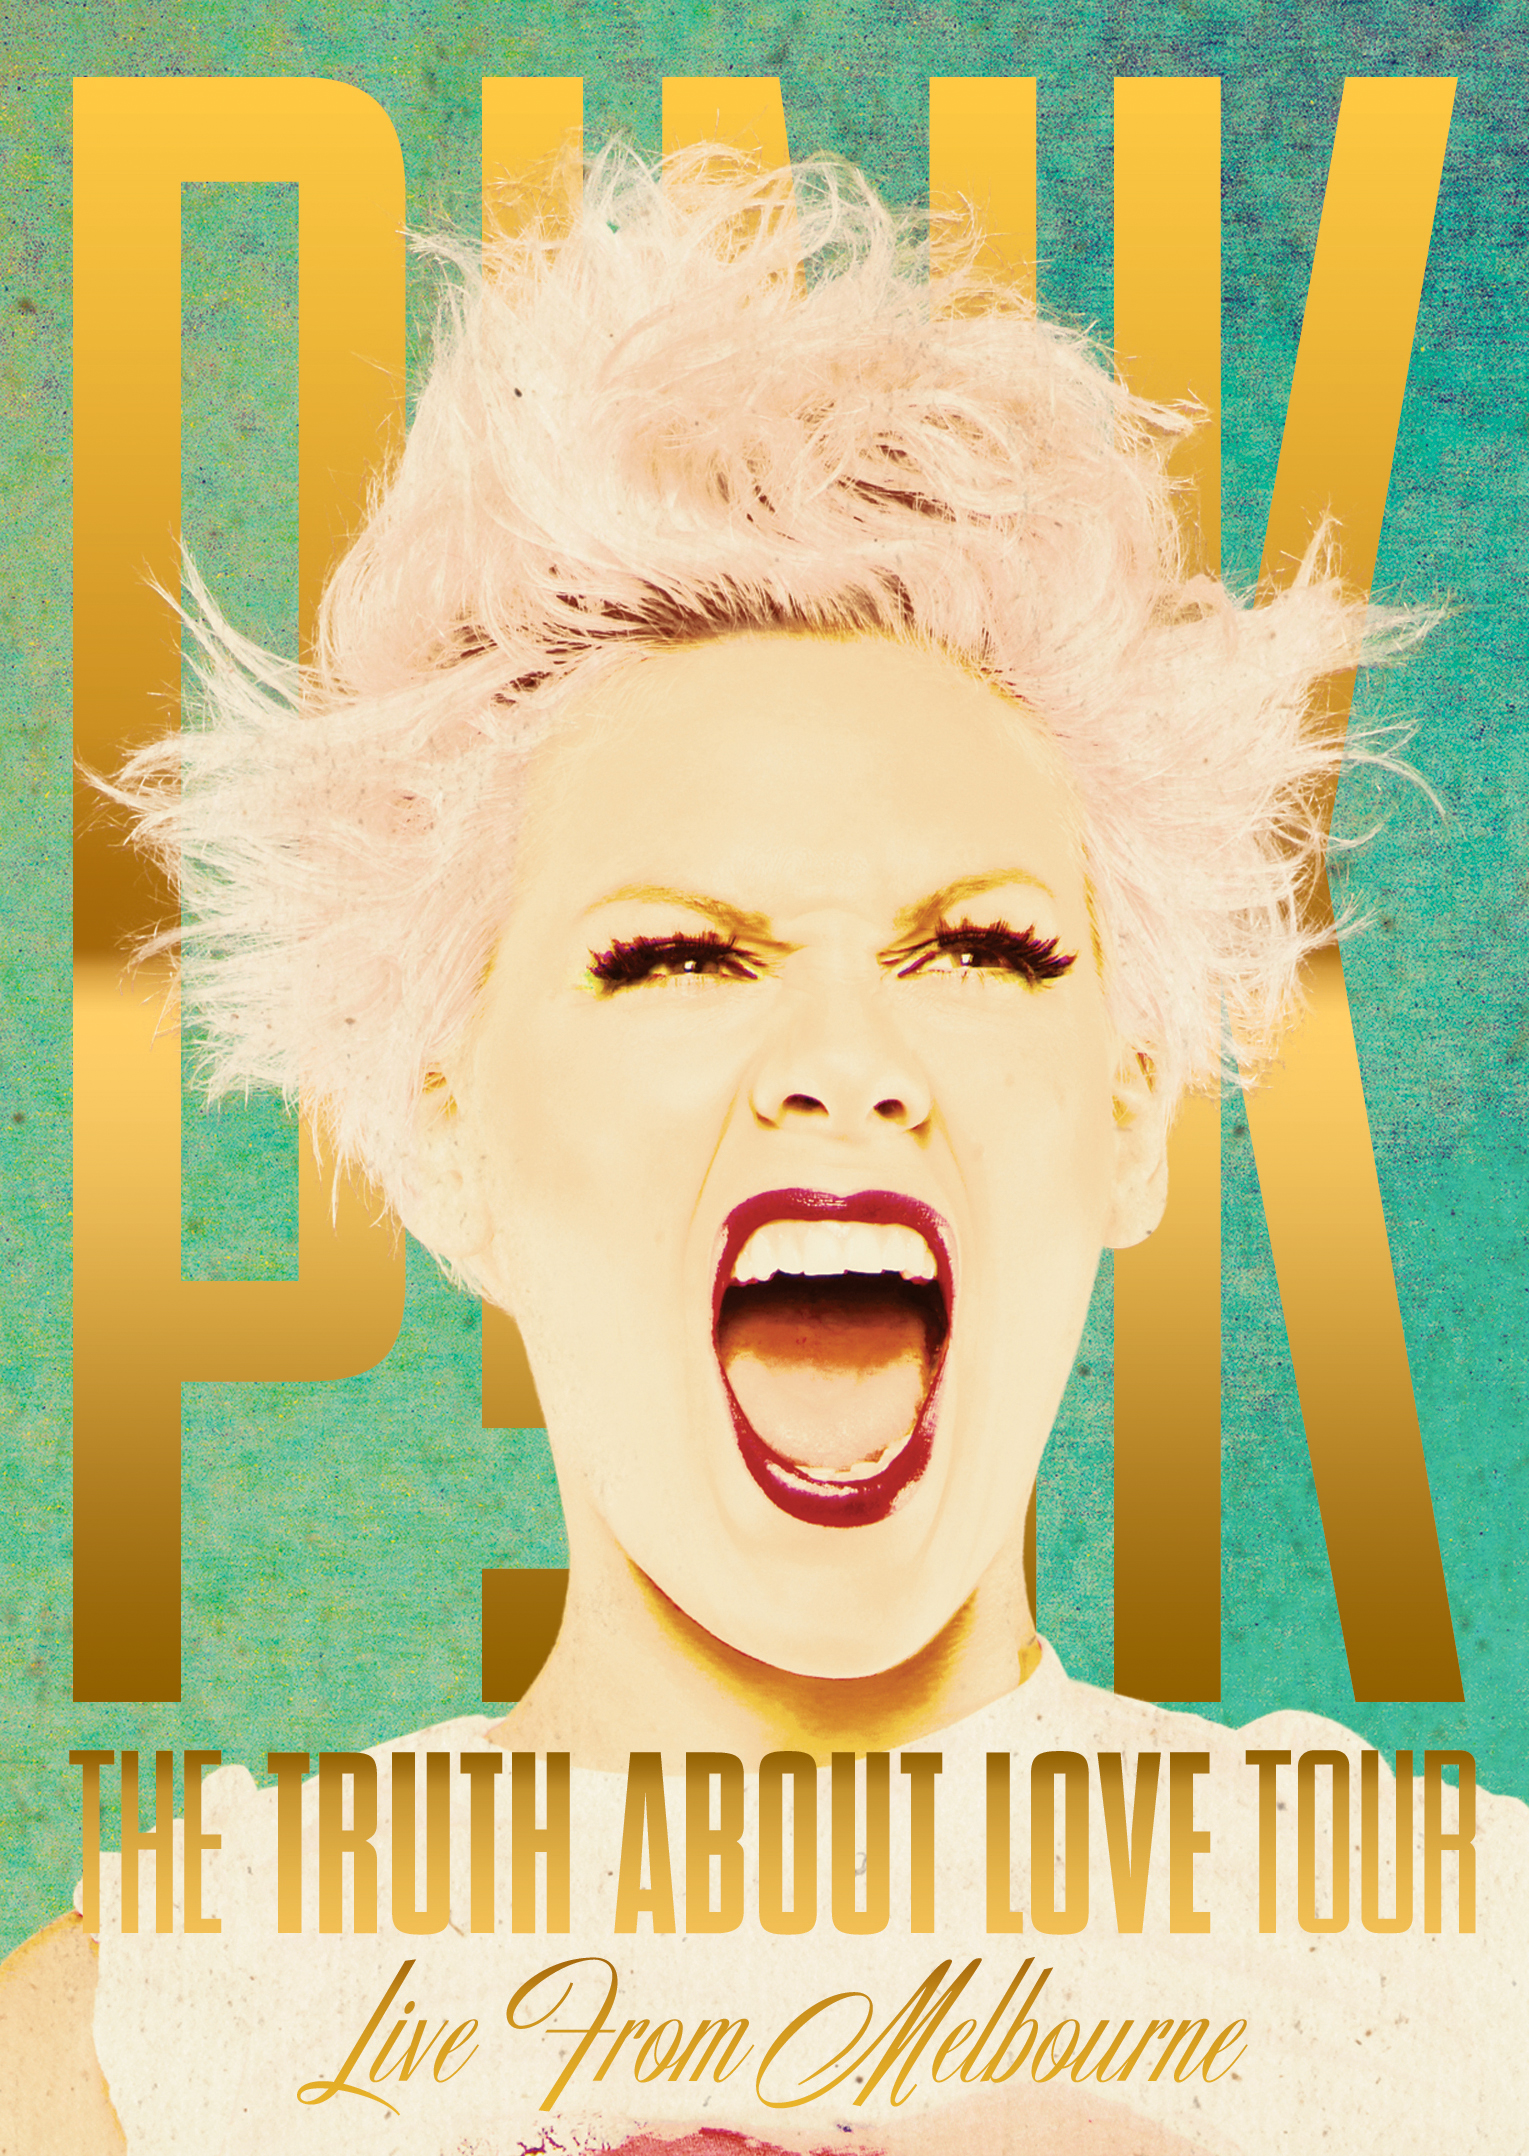 (DVD) The - From - Truth Melbourne P!nk Love Live Tour: About